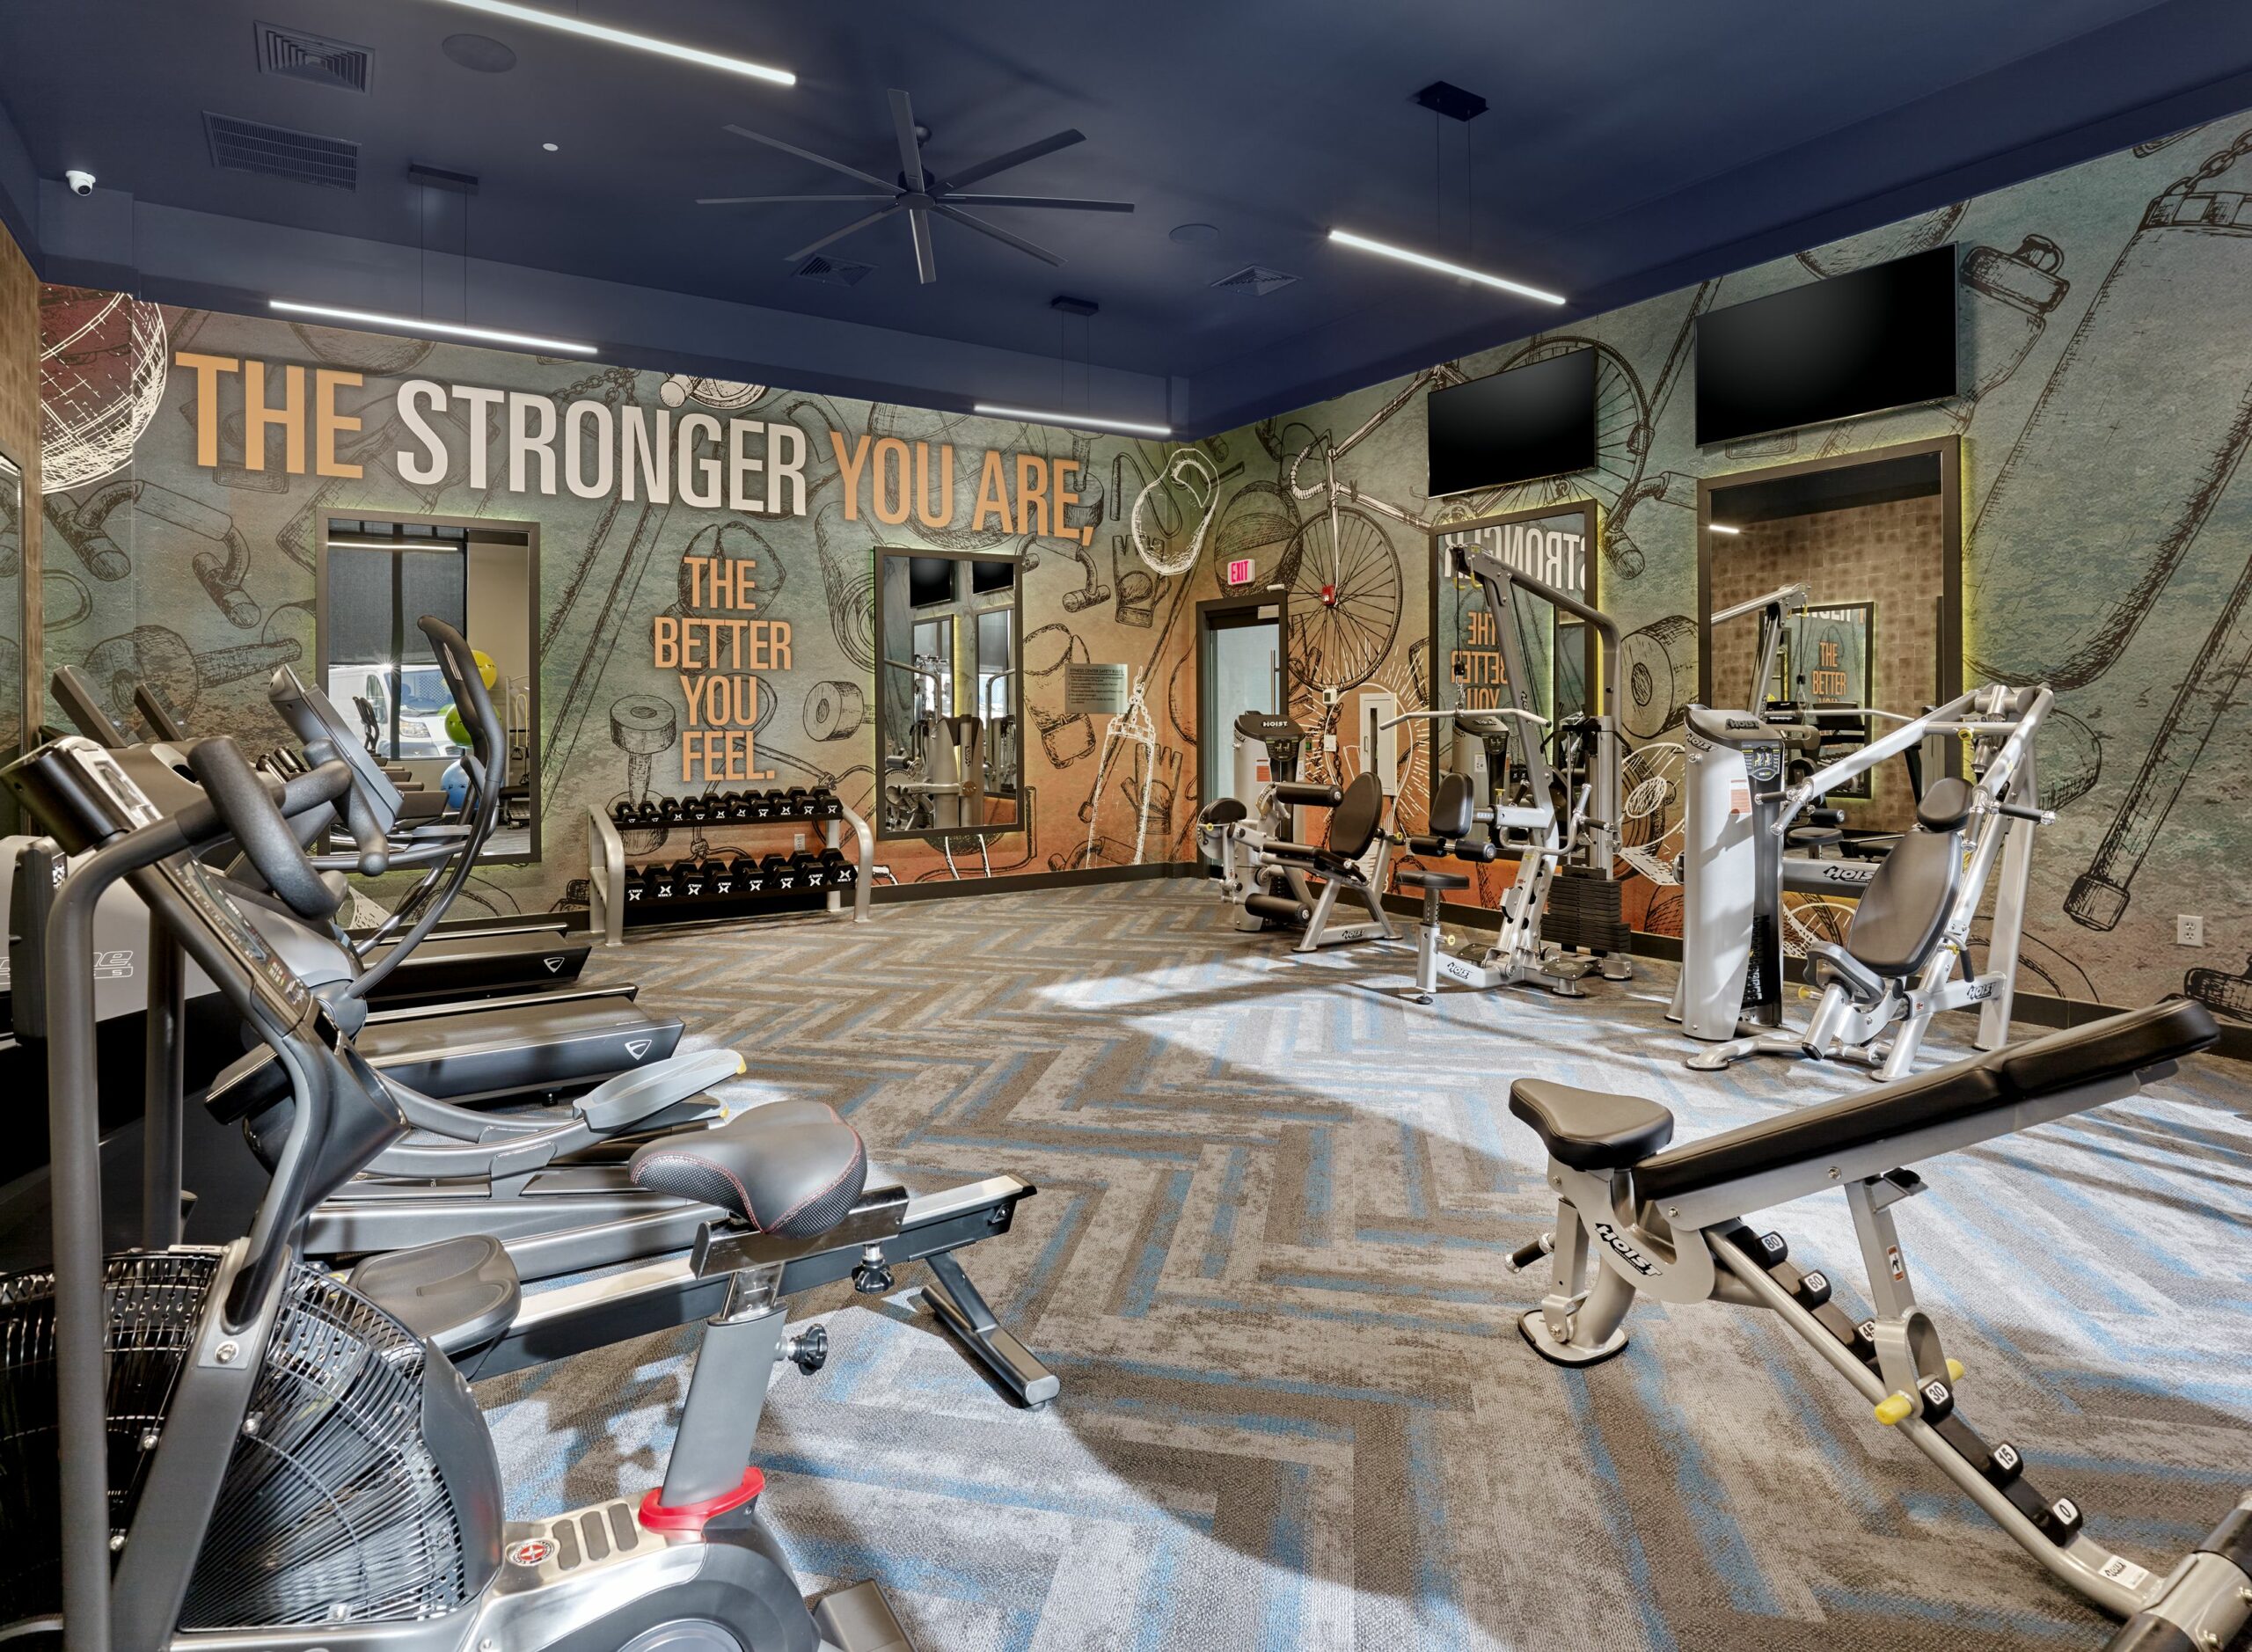 Fully equipped gym in upscale multifamily amenity space design.